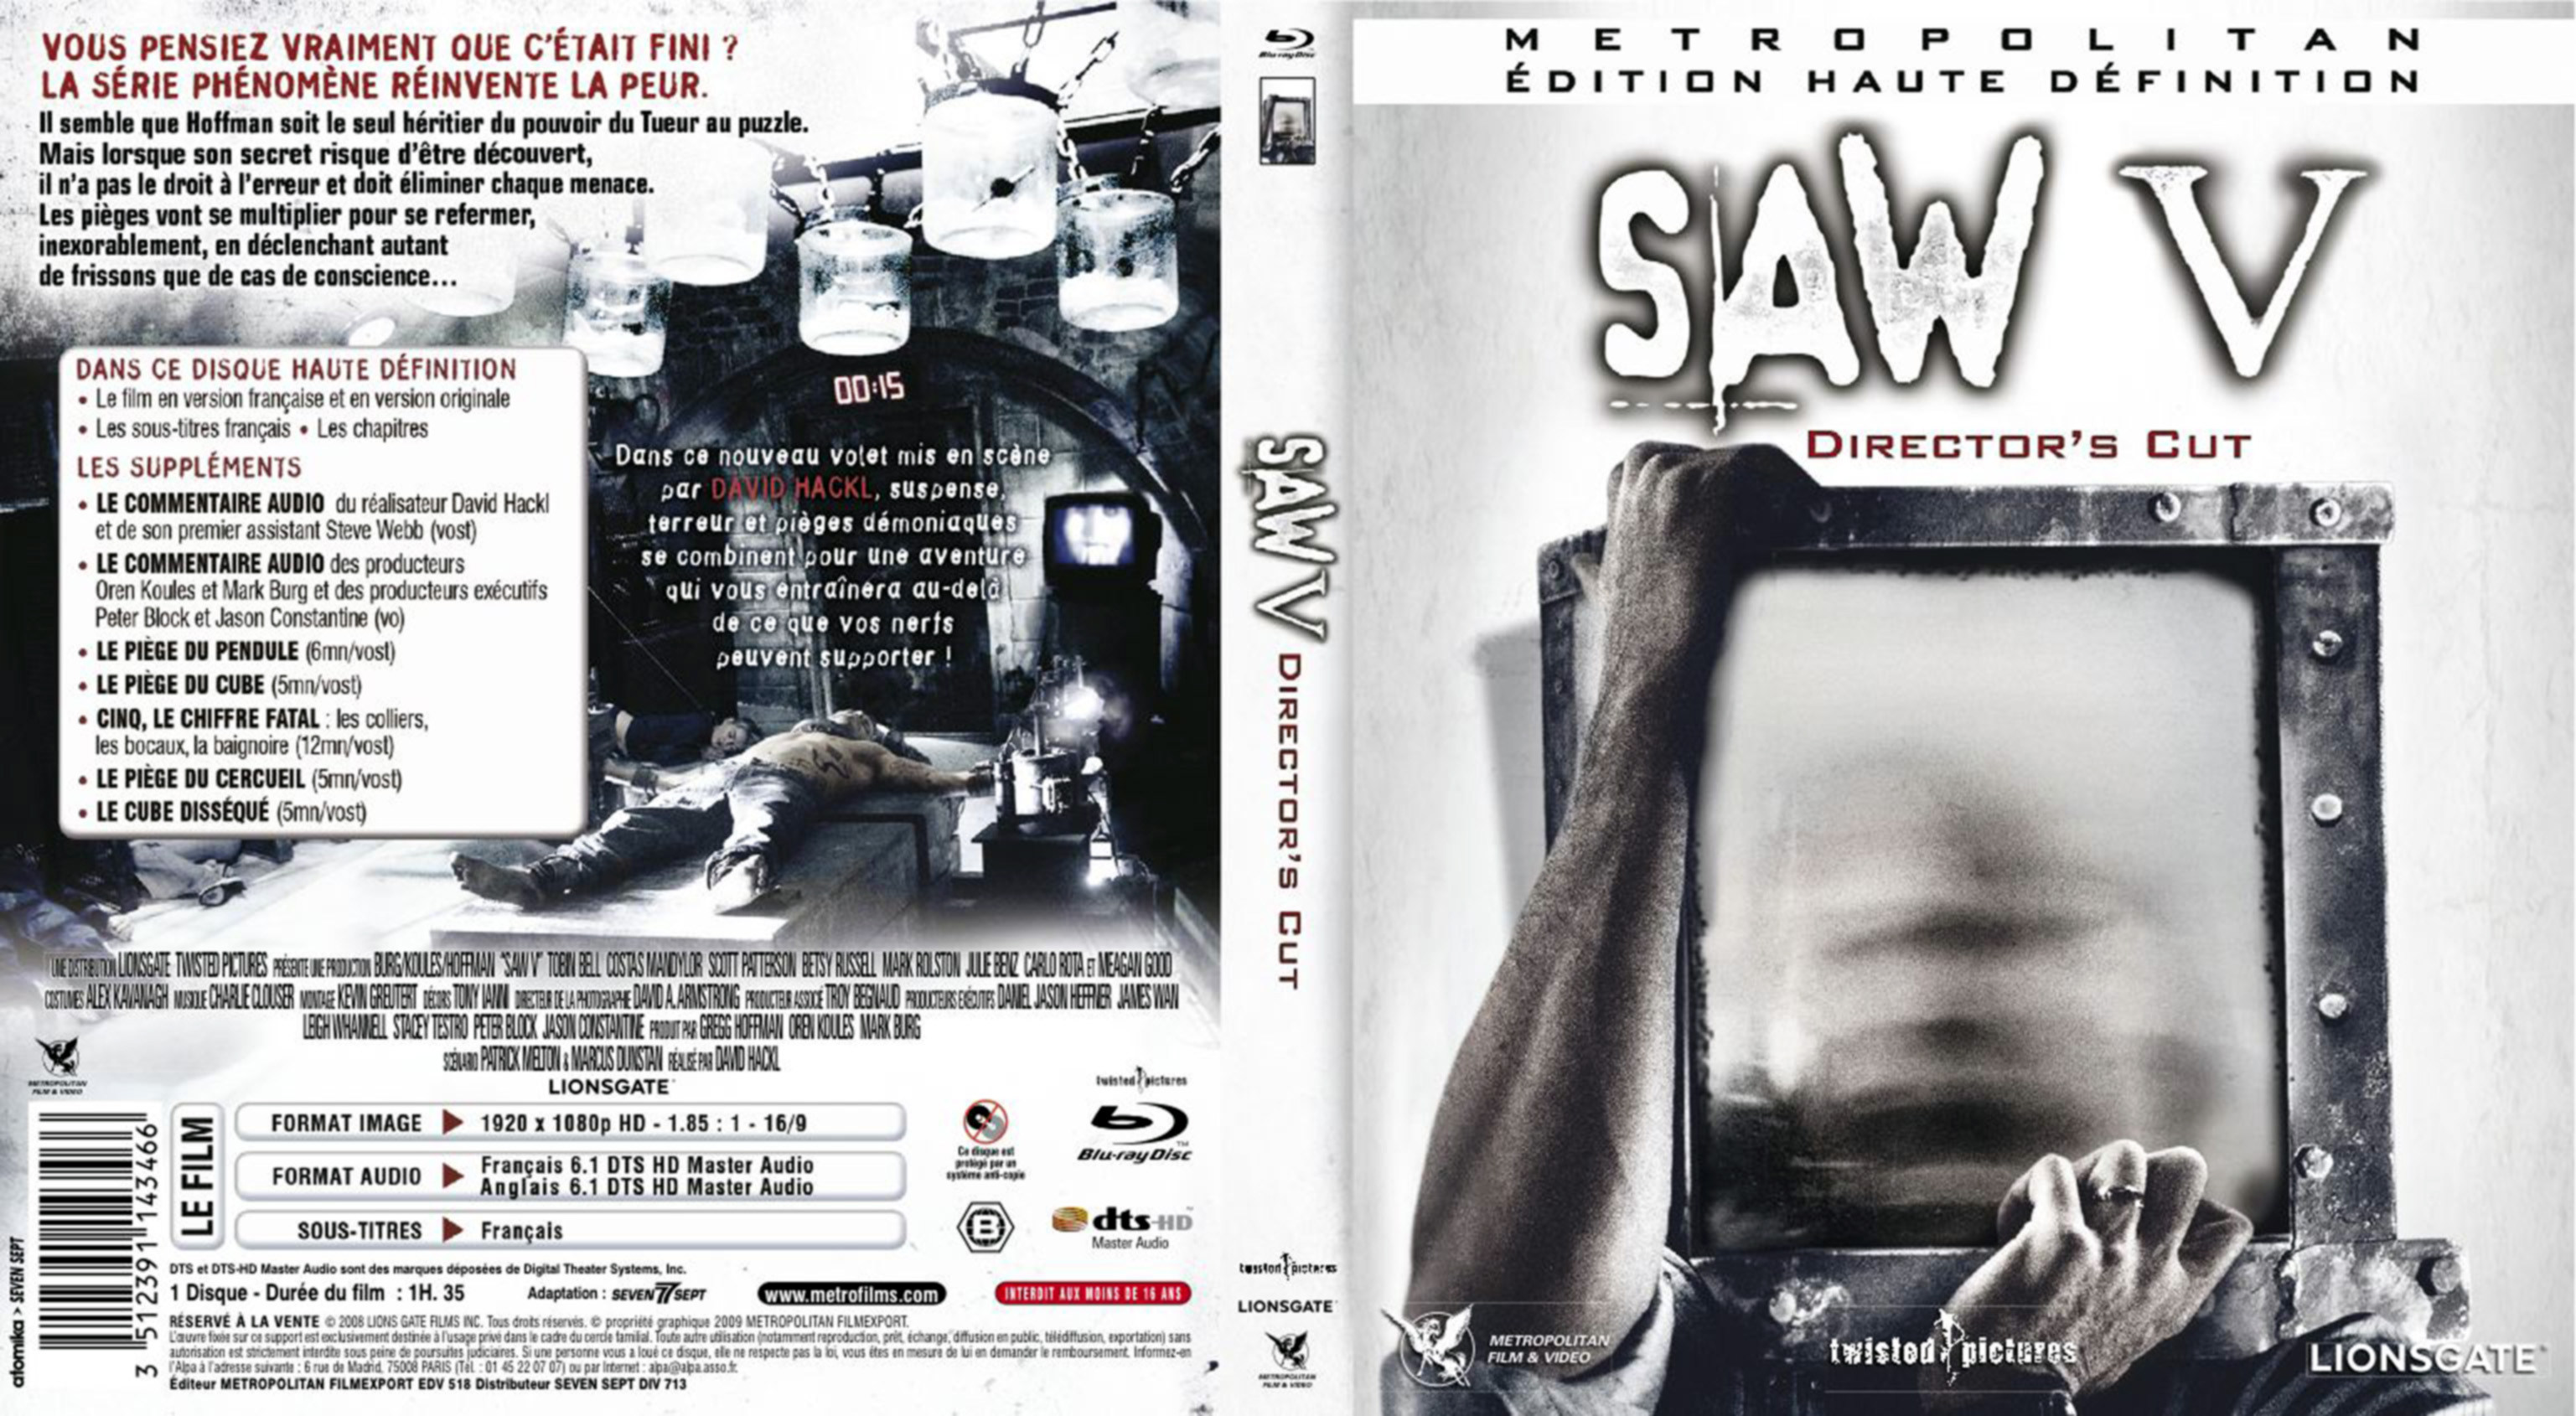 Jaquette DVD Saw 5 (BLU-RAY)